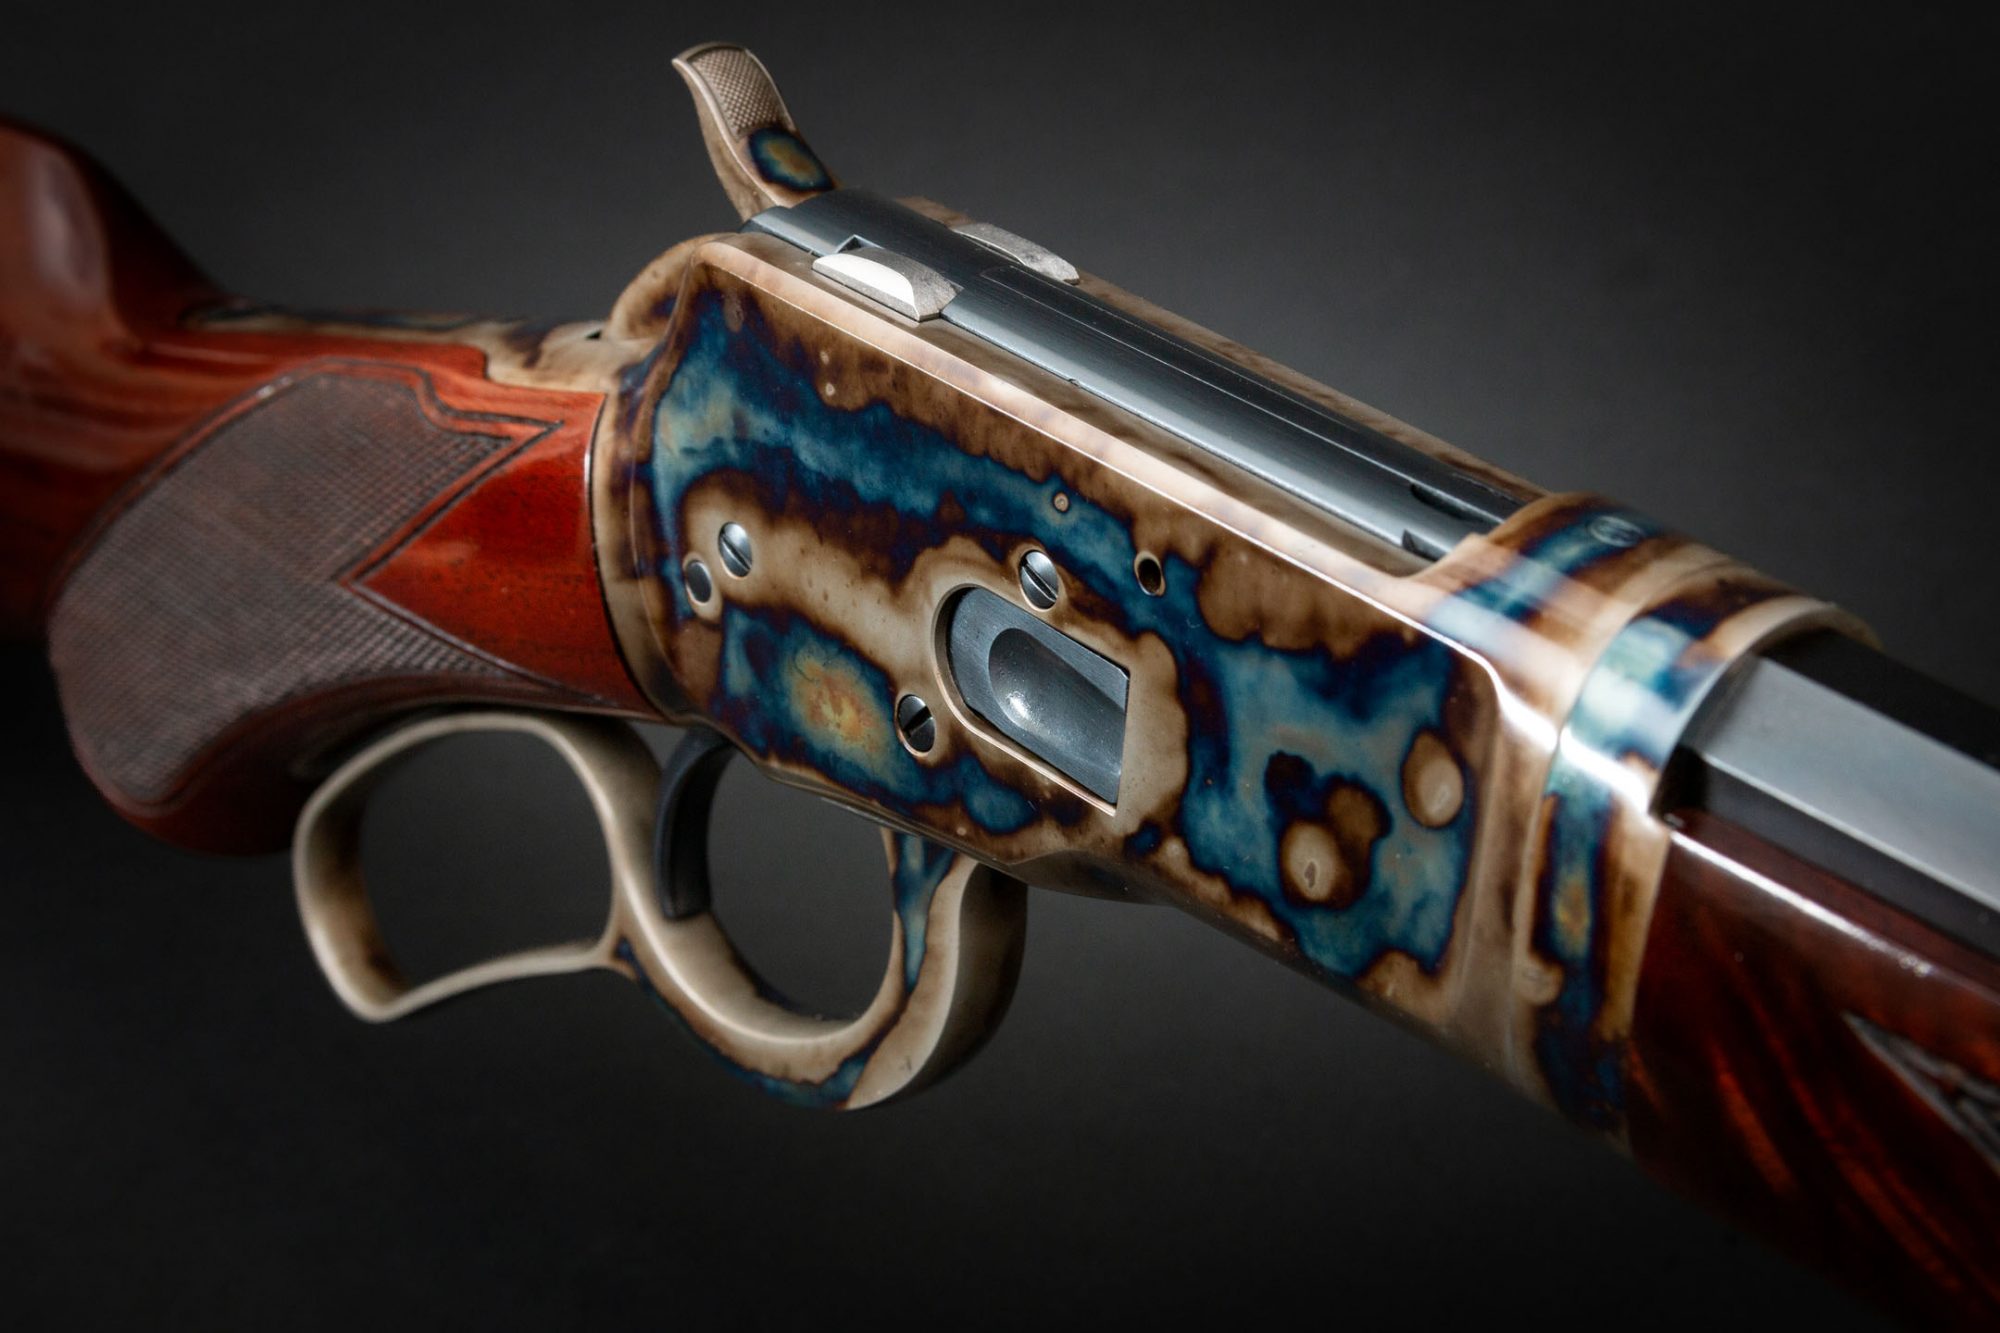 New Winchester Model 1892 featuring classic-era metal and wood finishes by Turnbull Restoration Co. of Bloomfield, NY